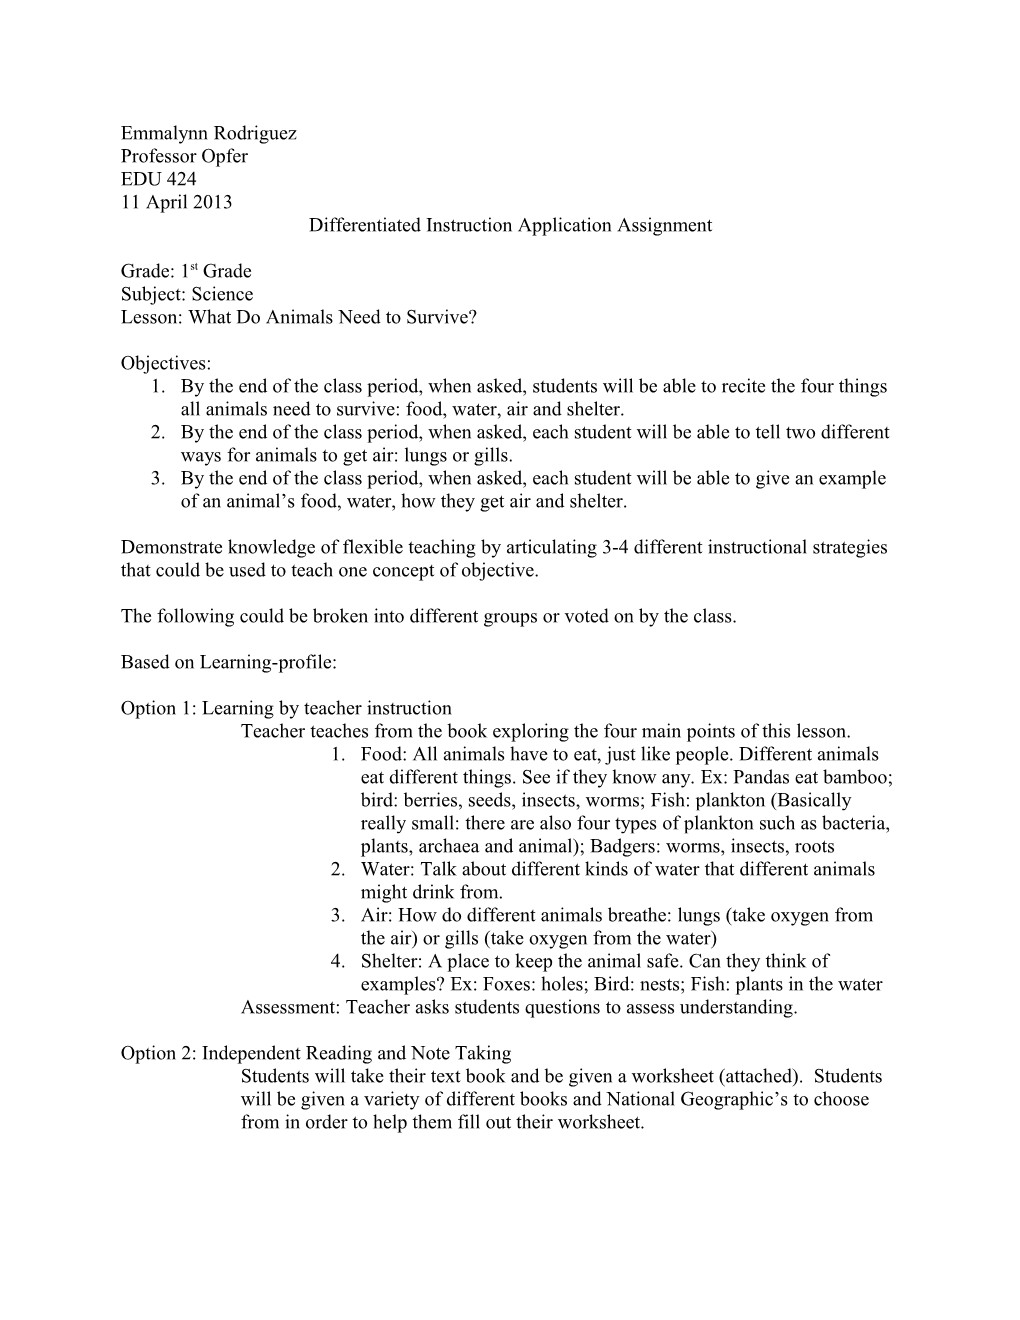 Differentiated Instruction Application Assignment